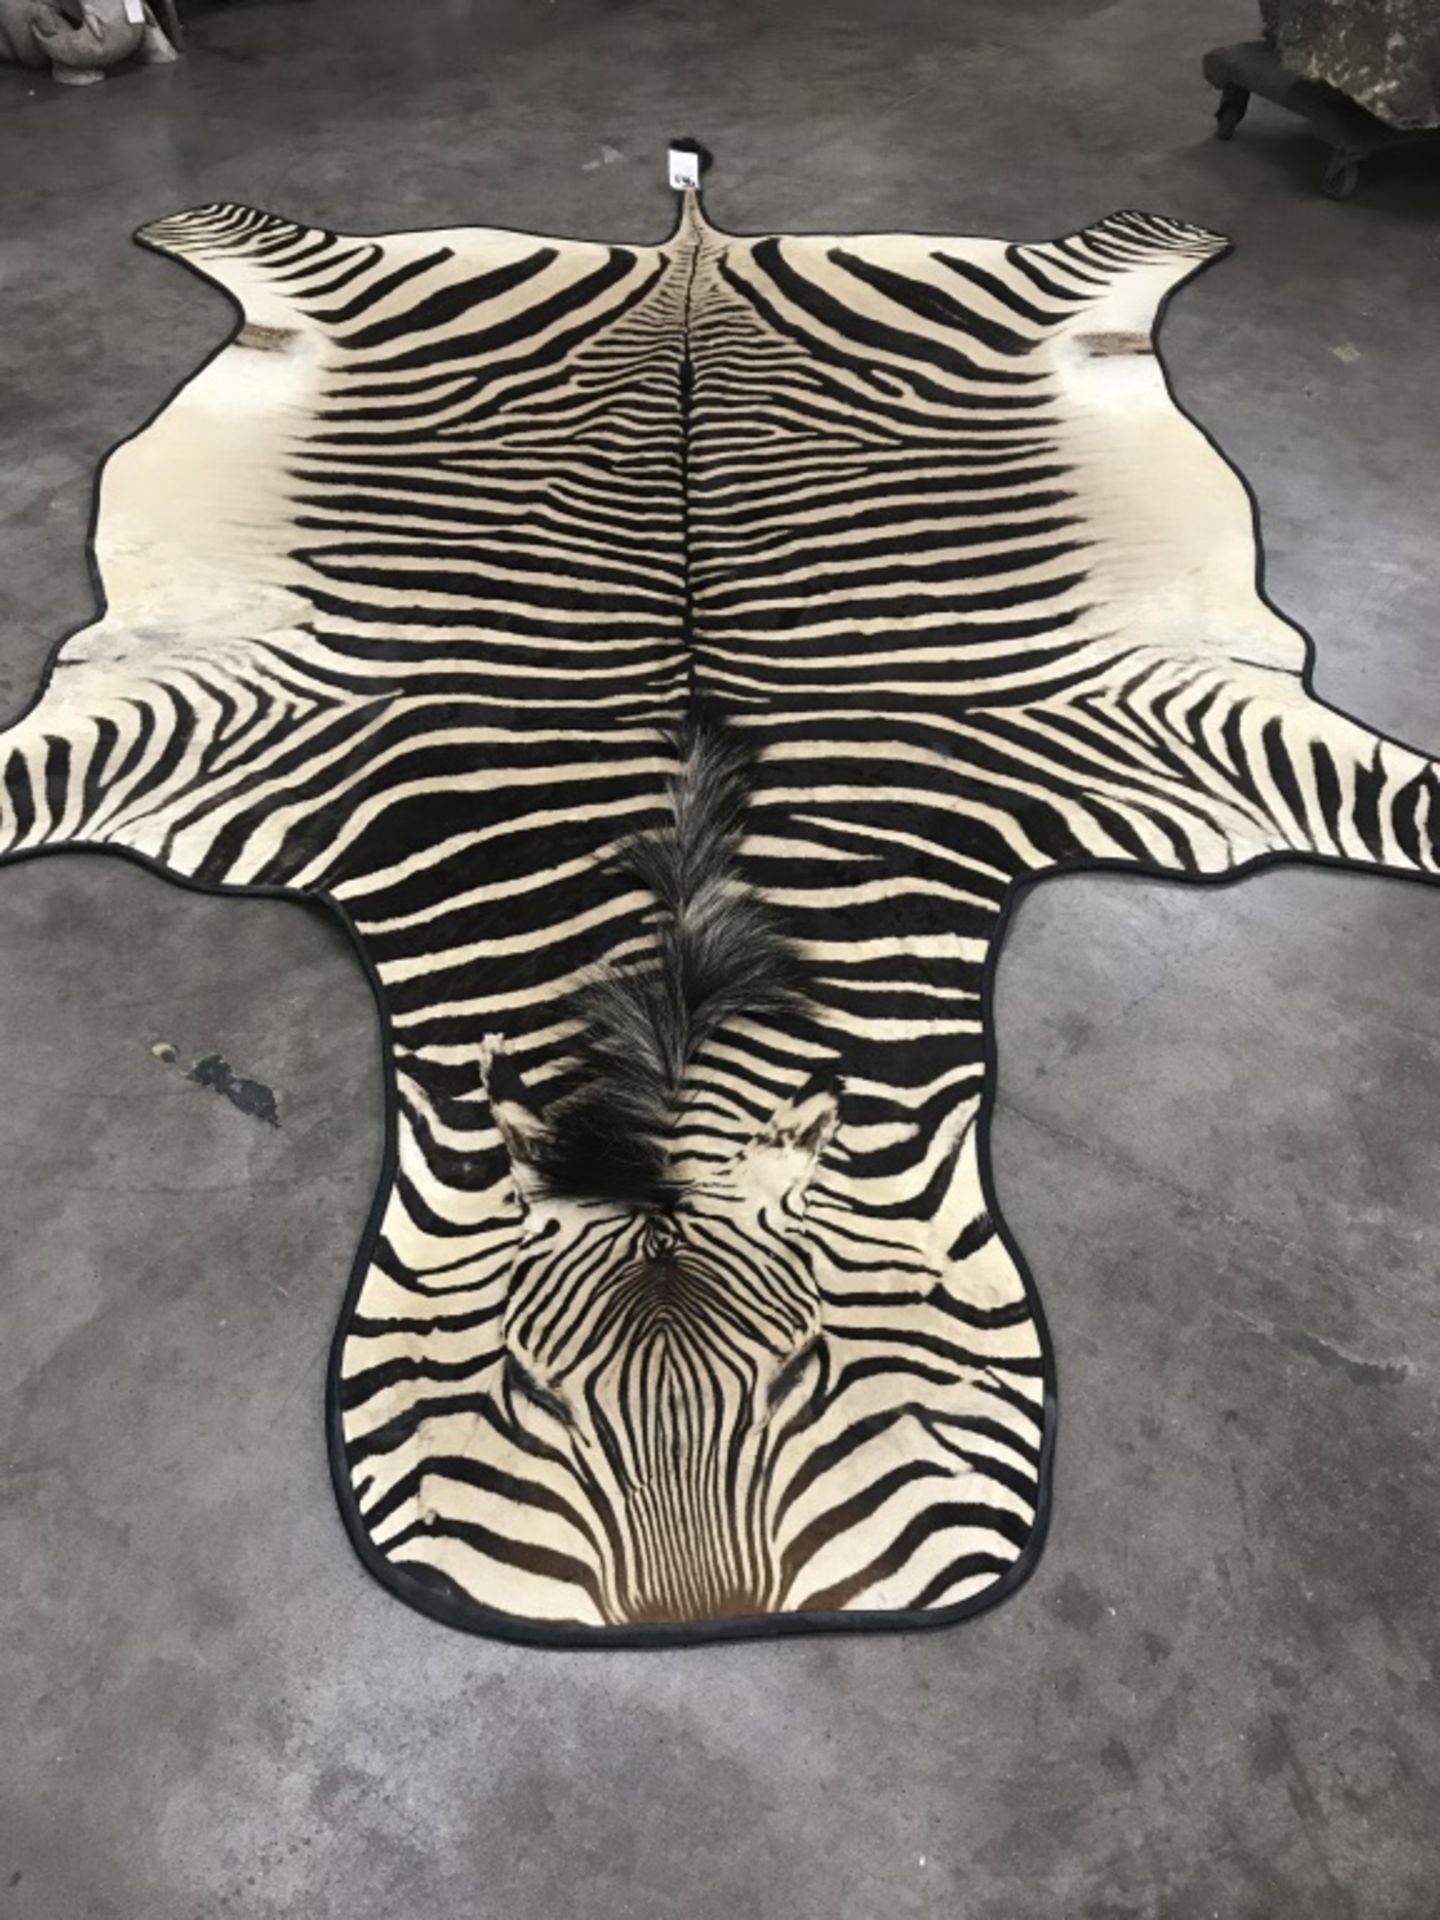 Very Nice Zebra Rug (TX Res. Only) - Image 3 of 13